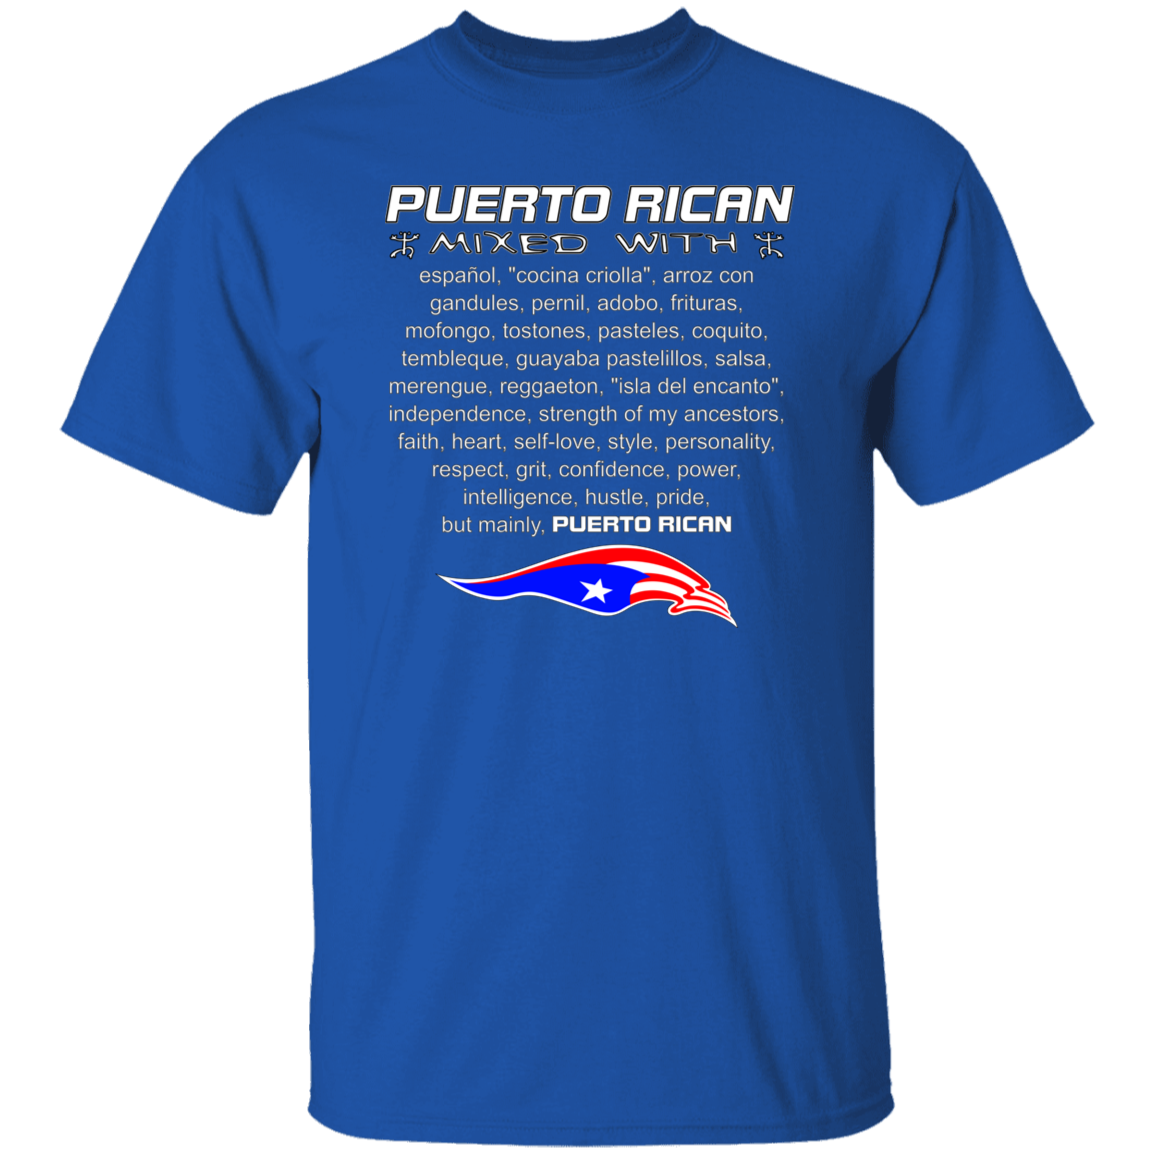 Puerto Rican Mixed With -  5.3 oz. T-Shirt